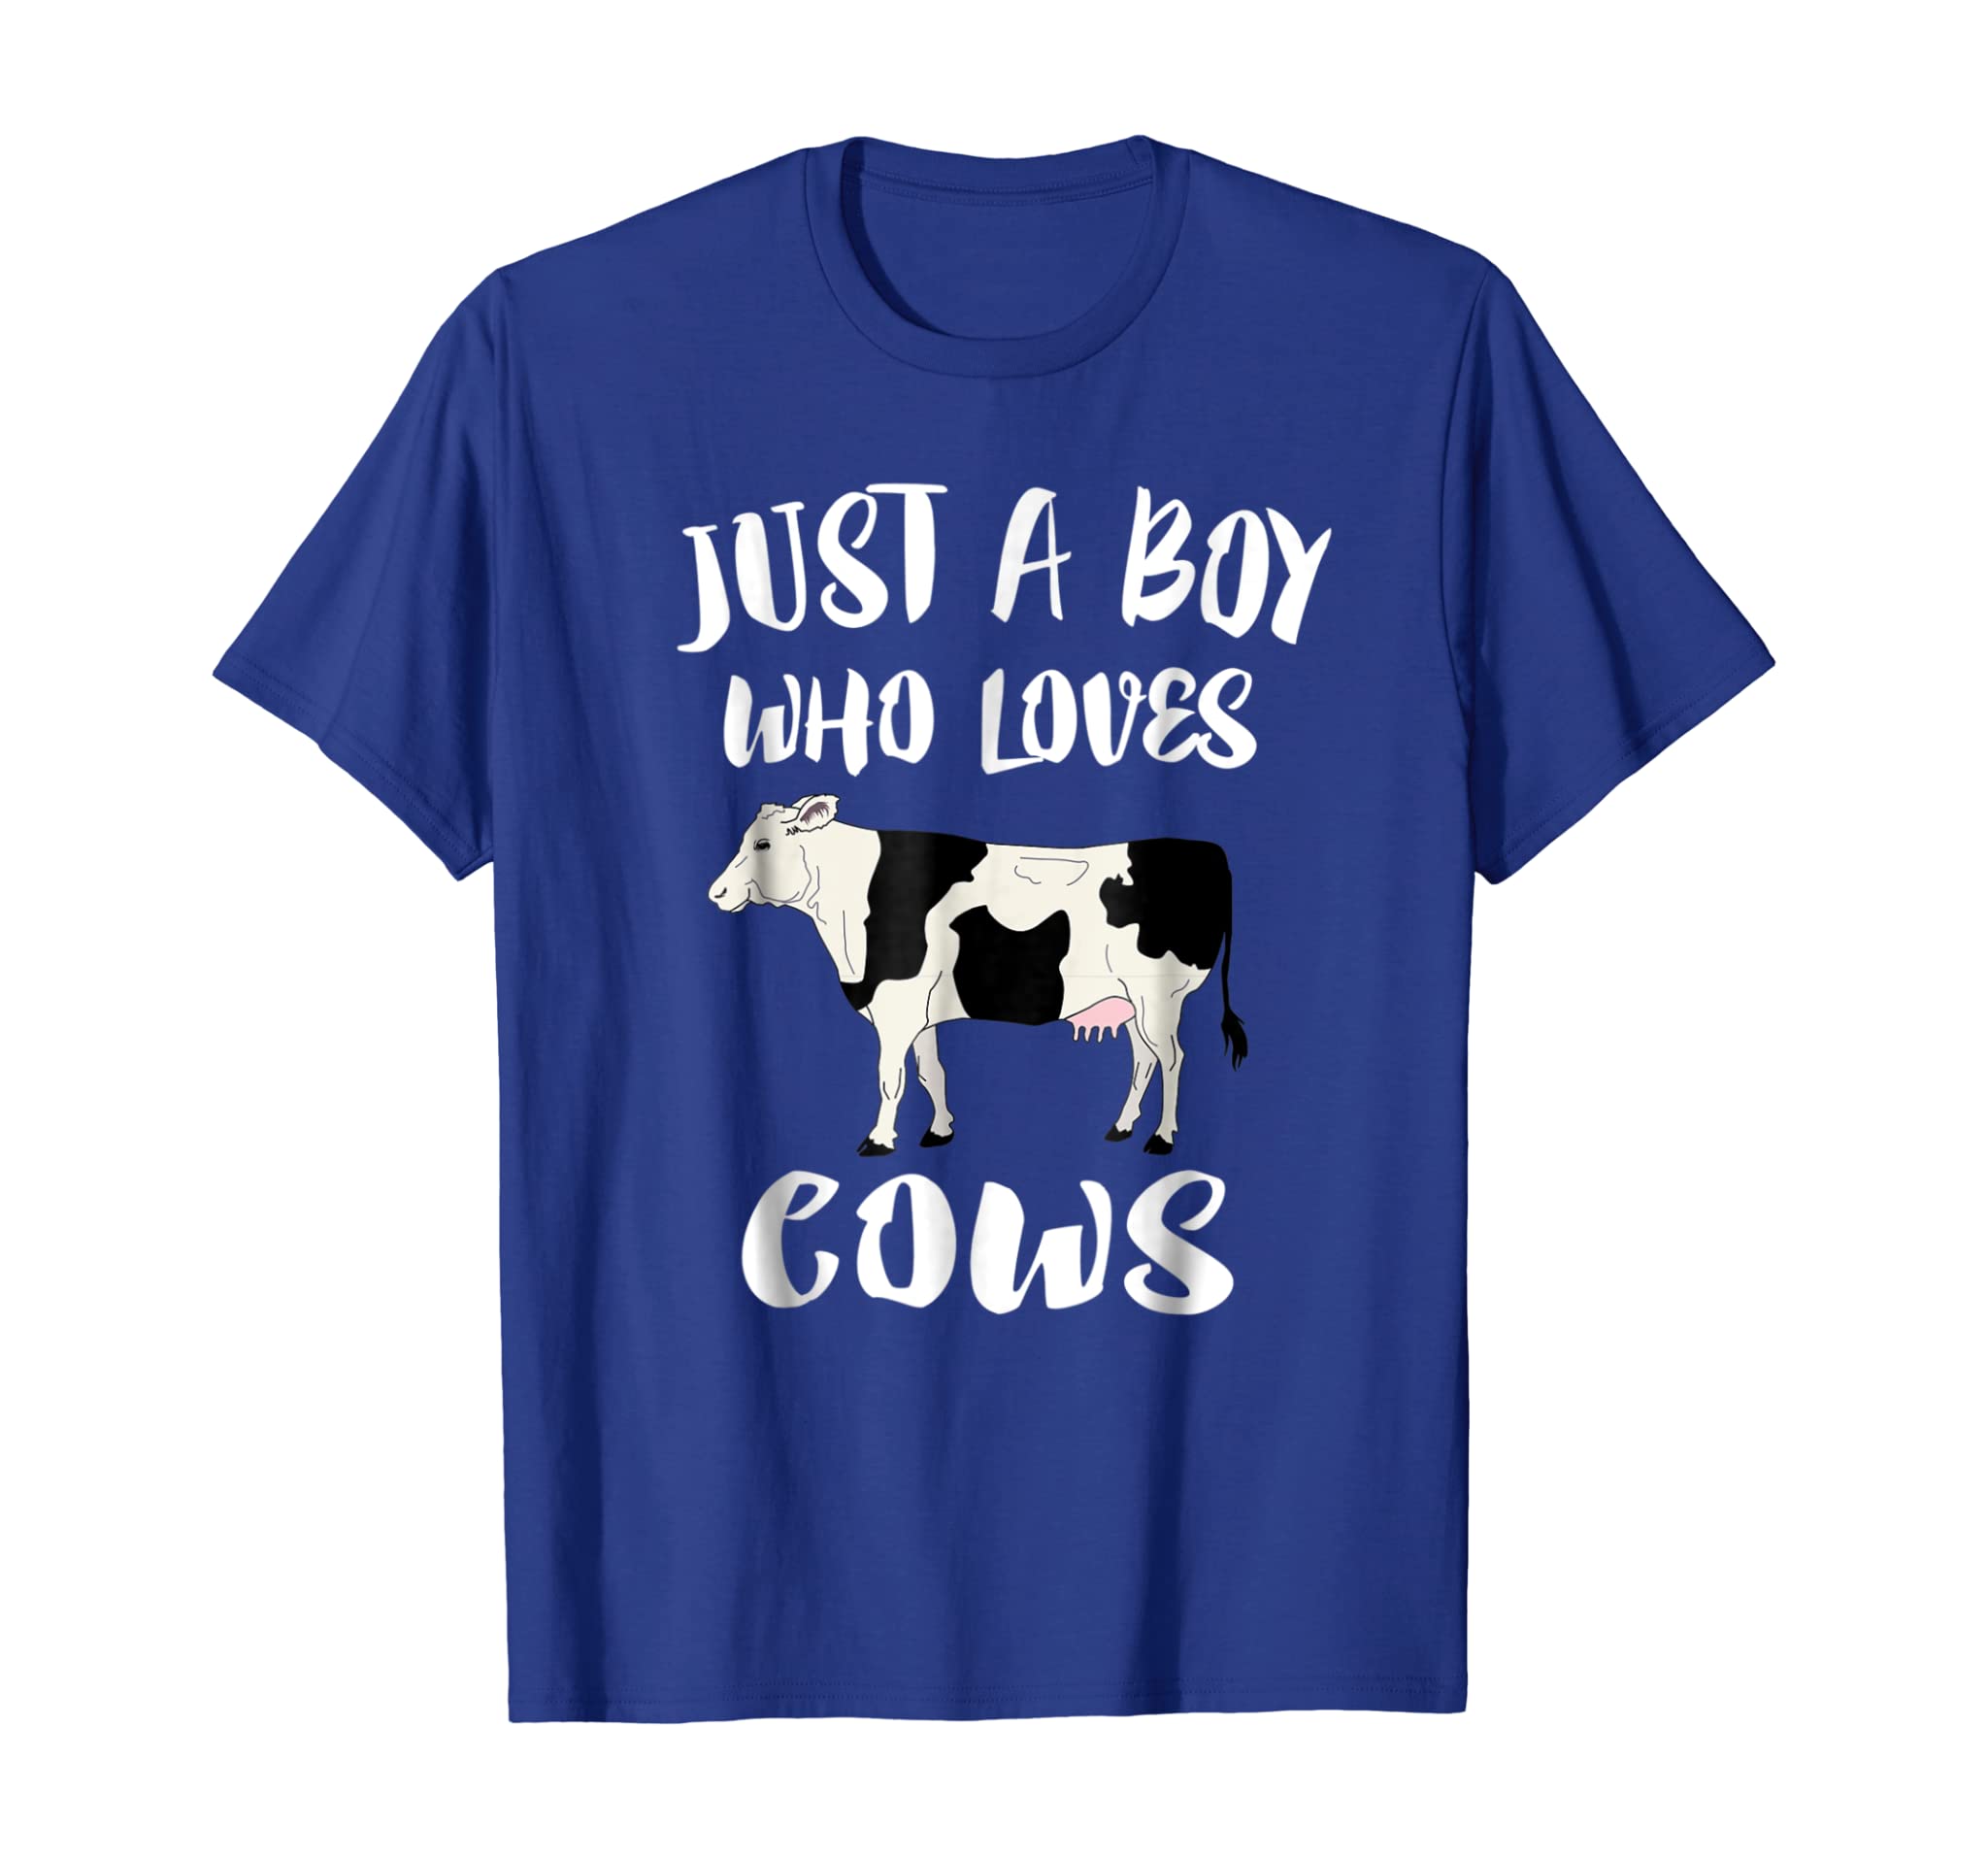 Just A Boy Who Loves Cows T-Shirt Animal Lover Farm Gift